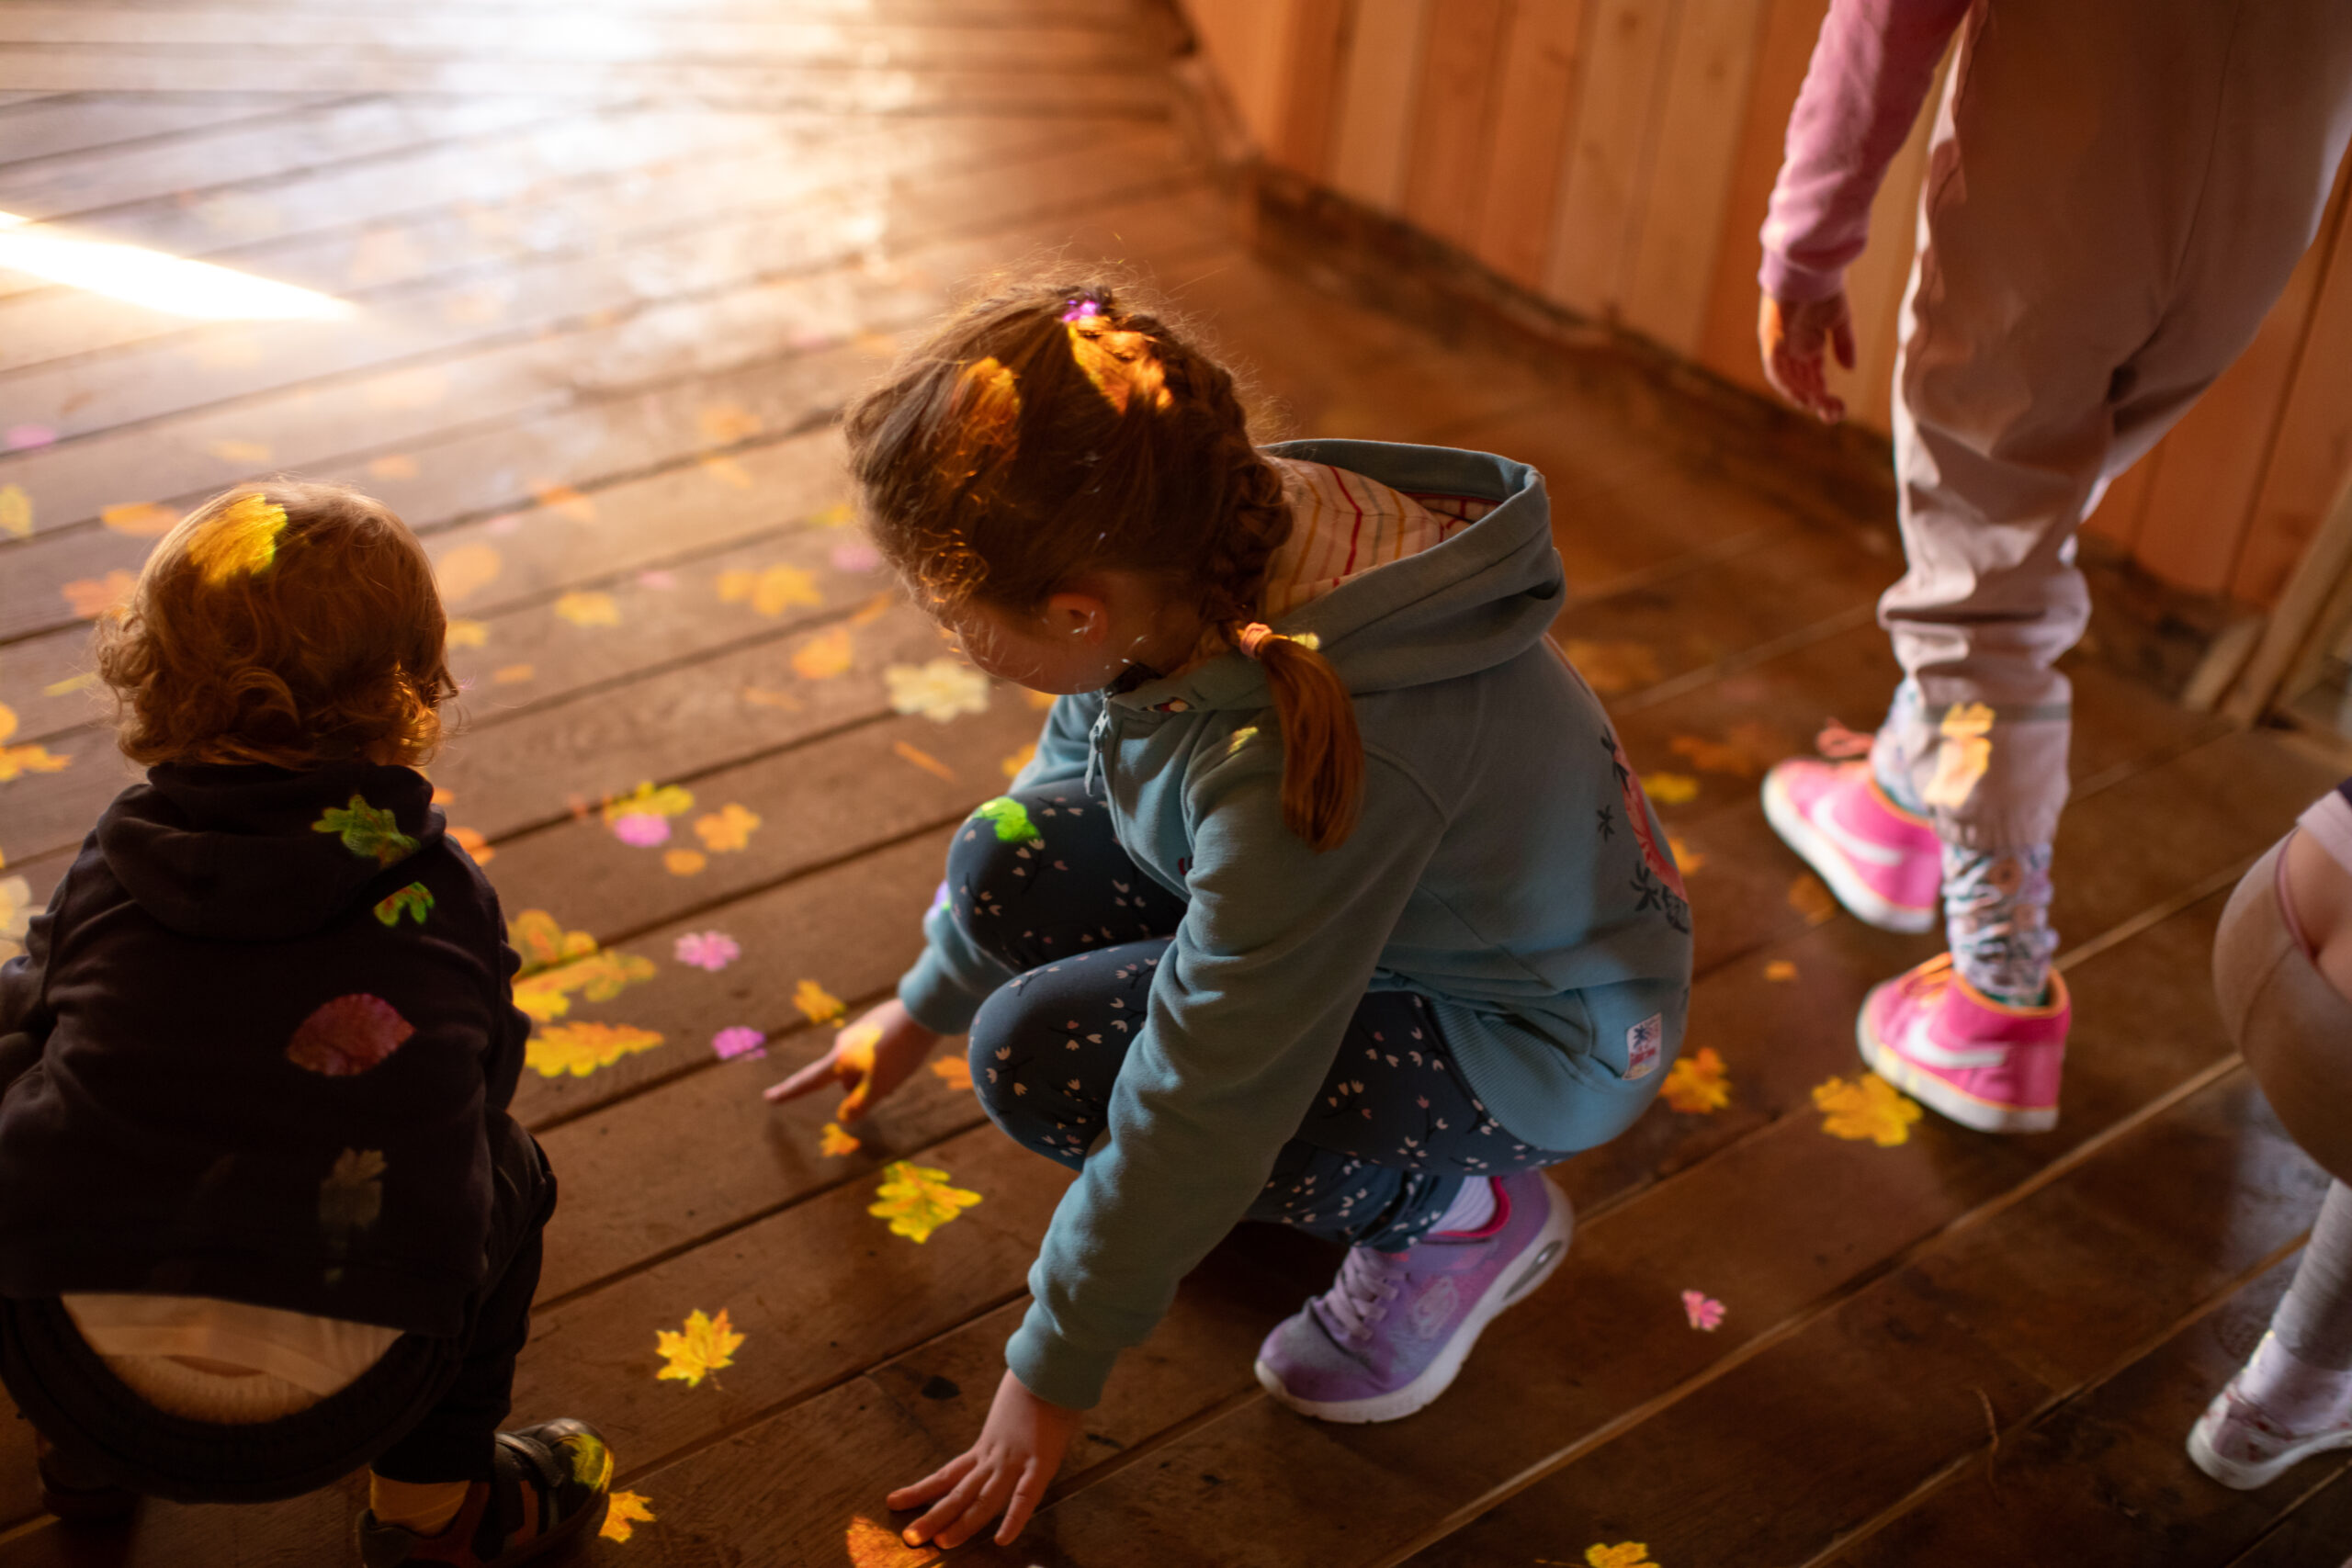 Two young children, kneeling, looking at images of leaves that are being projected on to the floor.